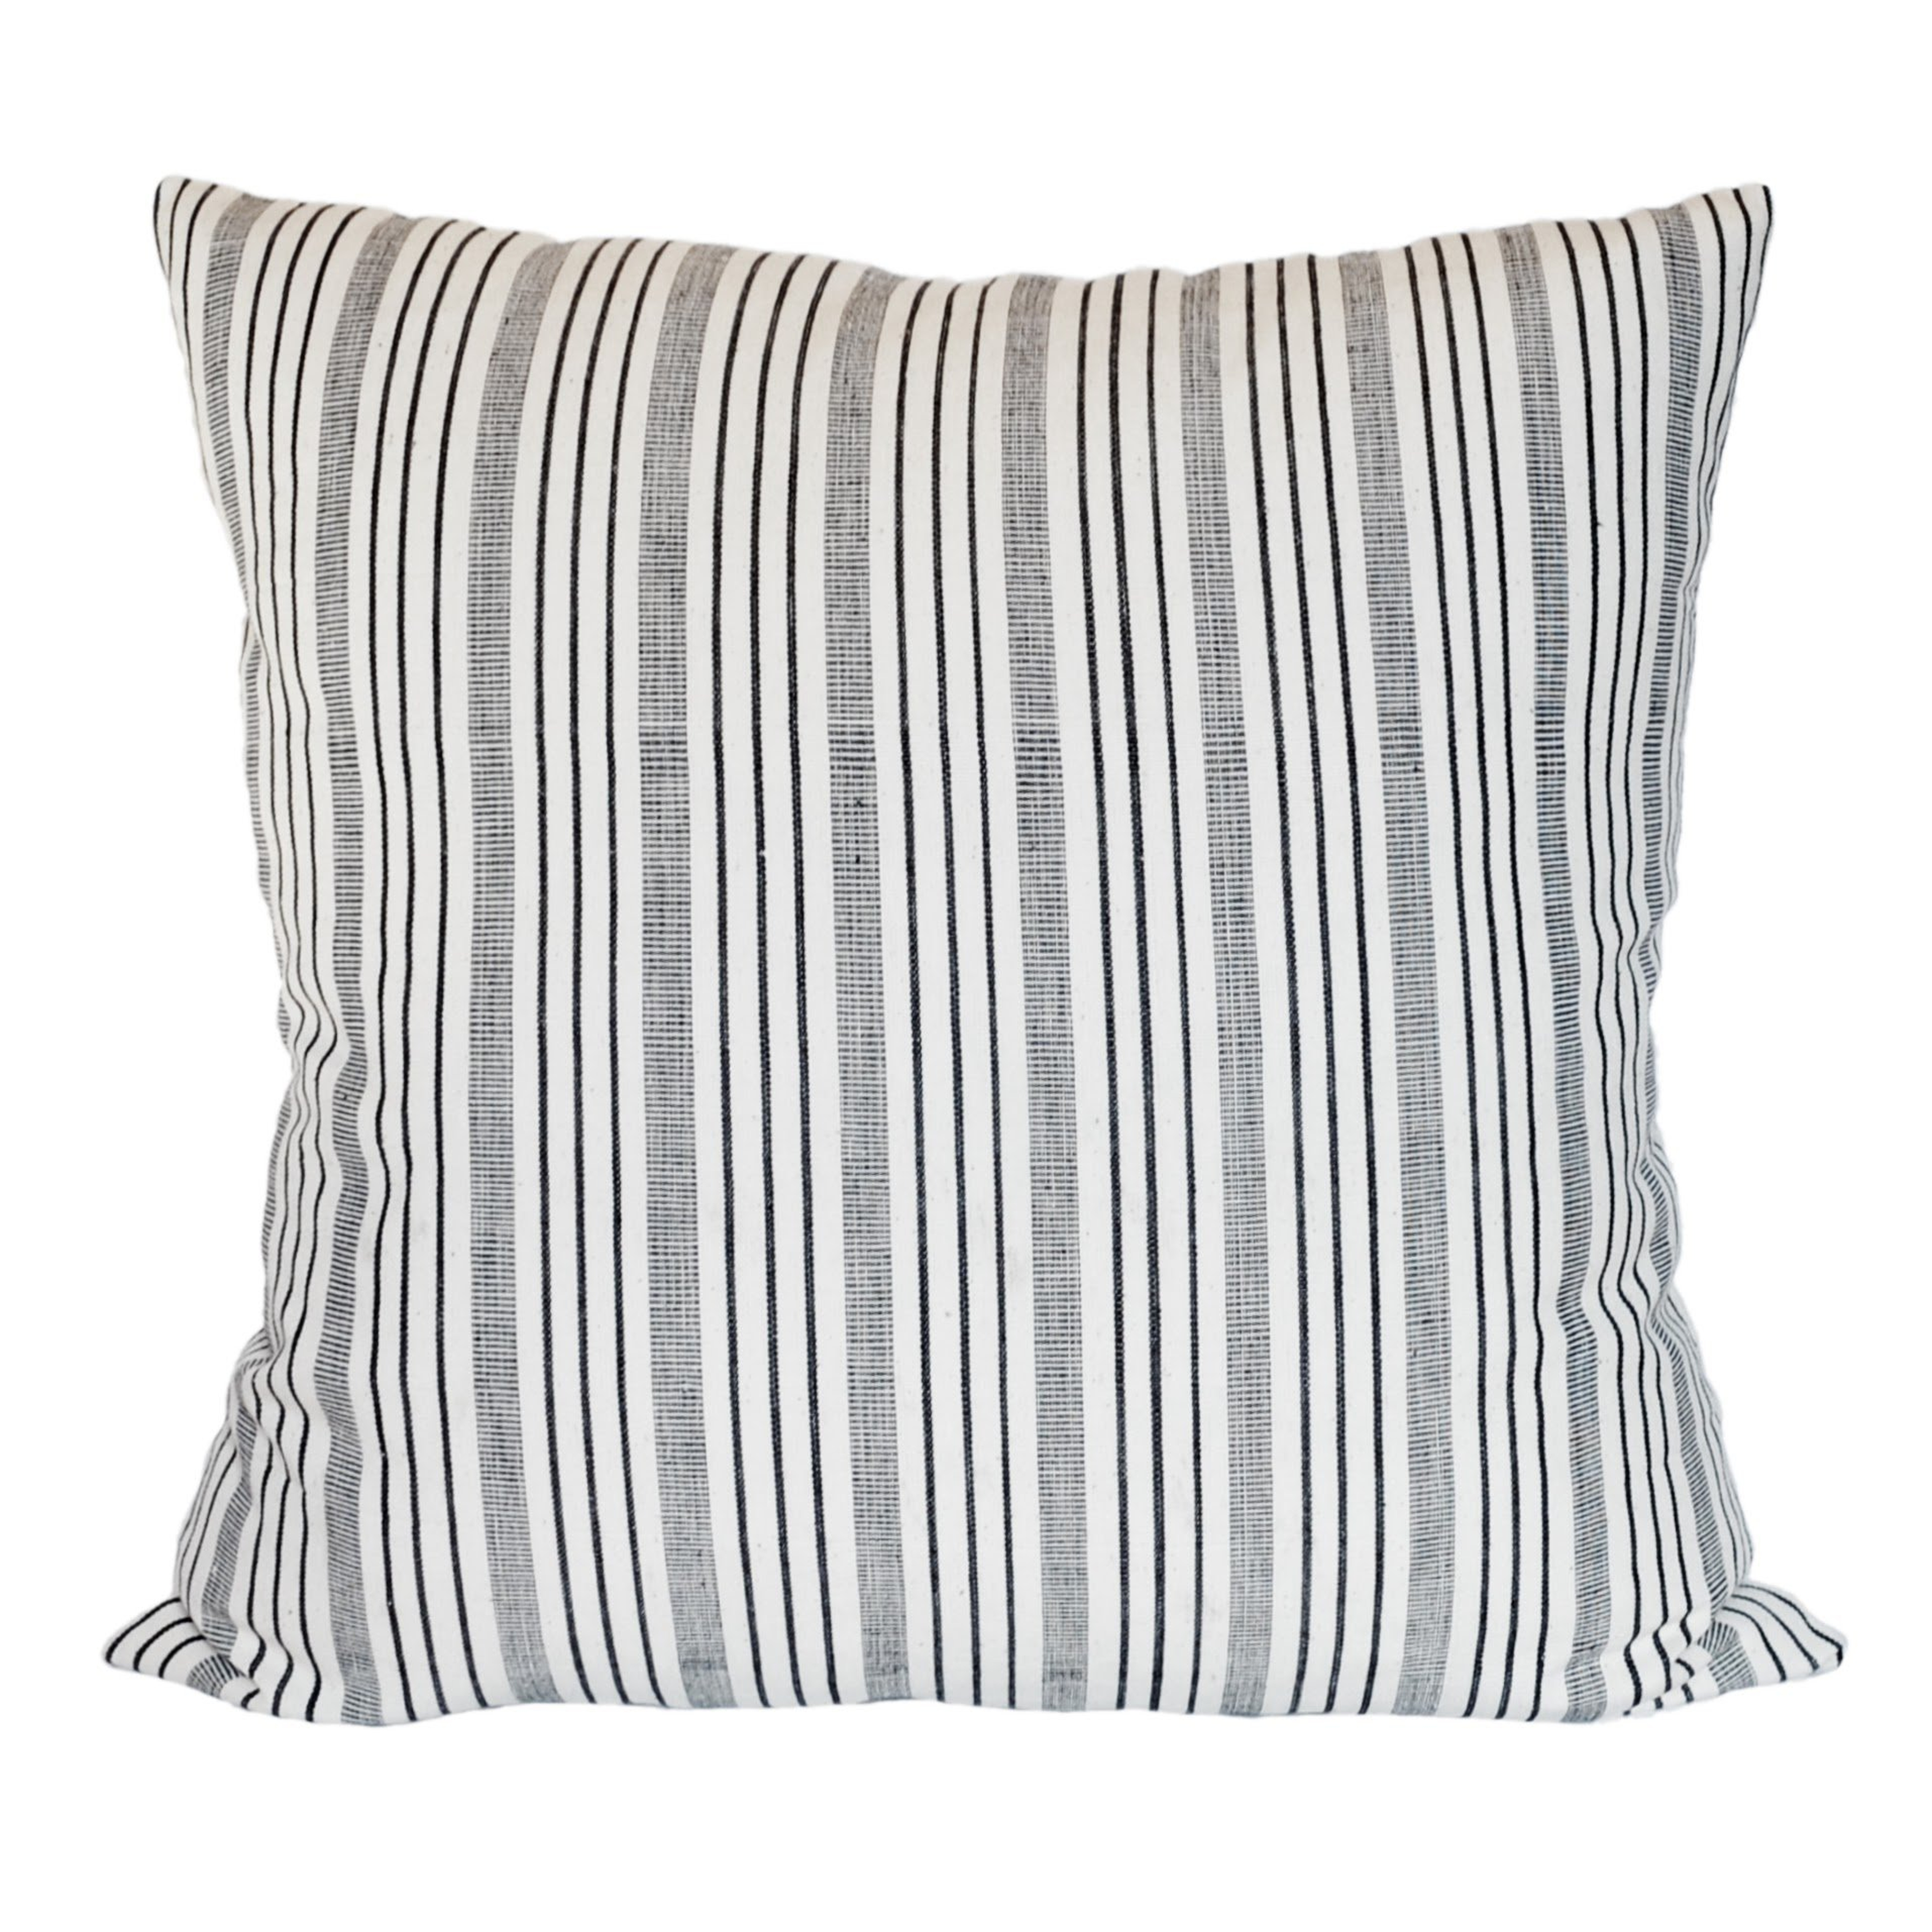 Handwoven Black and Cream Variegated Stripe Pillow cover and insert - PillowPia